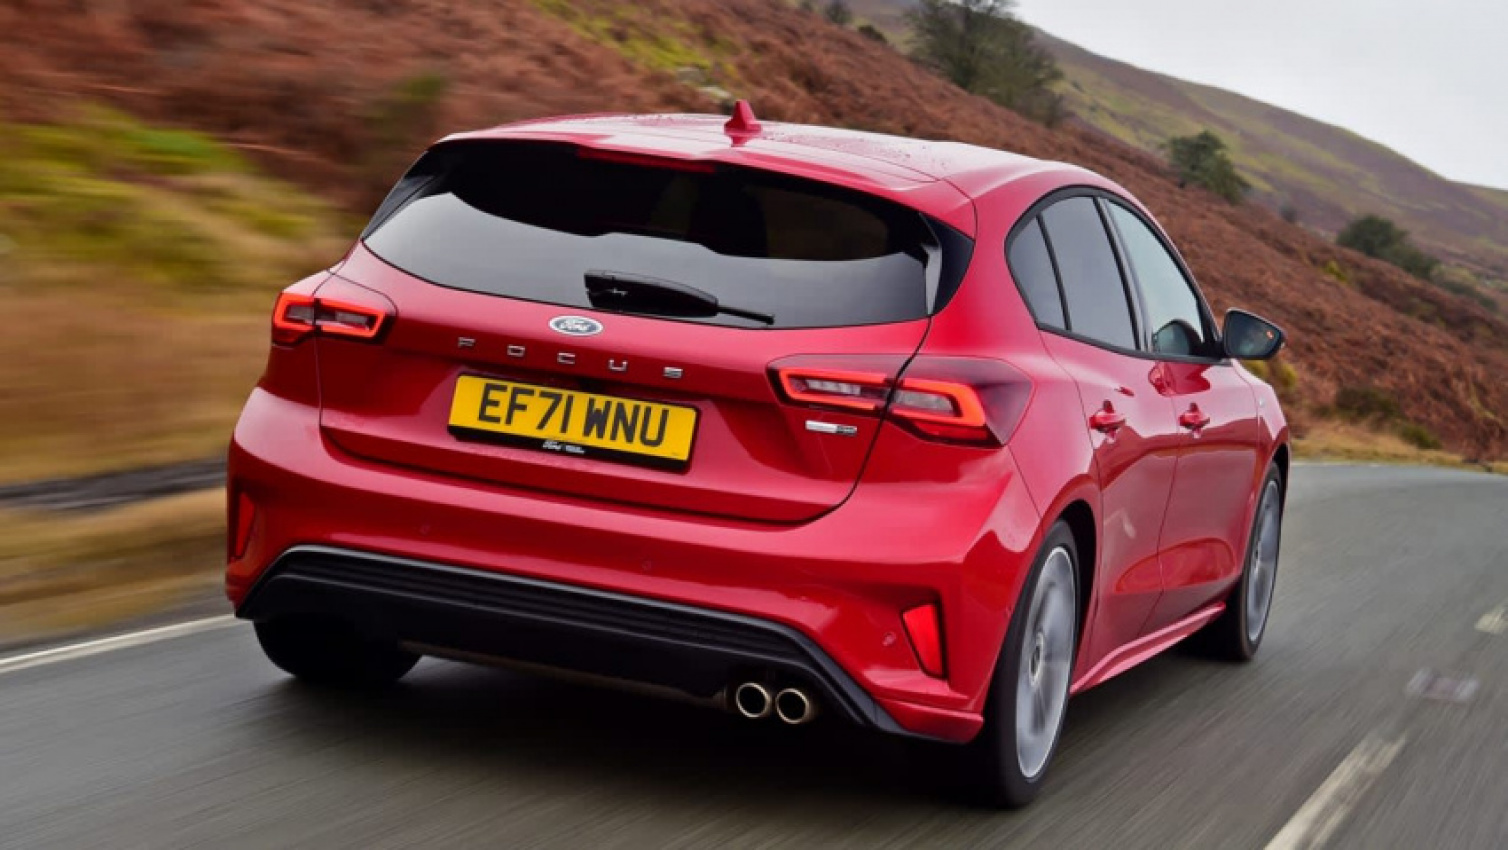 autos, cars, ford, geo, peugeot, reviews, volkswagen, android, compare cars, family hatchbacks, focus, ford focus, golf, peugeot 308, android, new peugeot 308 vs ford focus vs volkswagen golf: which should you buy?